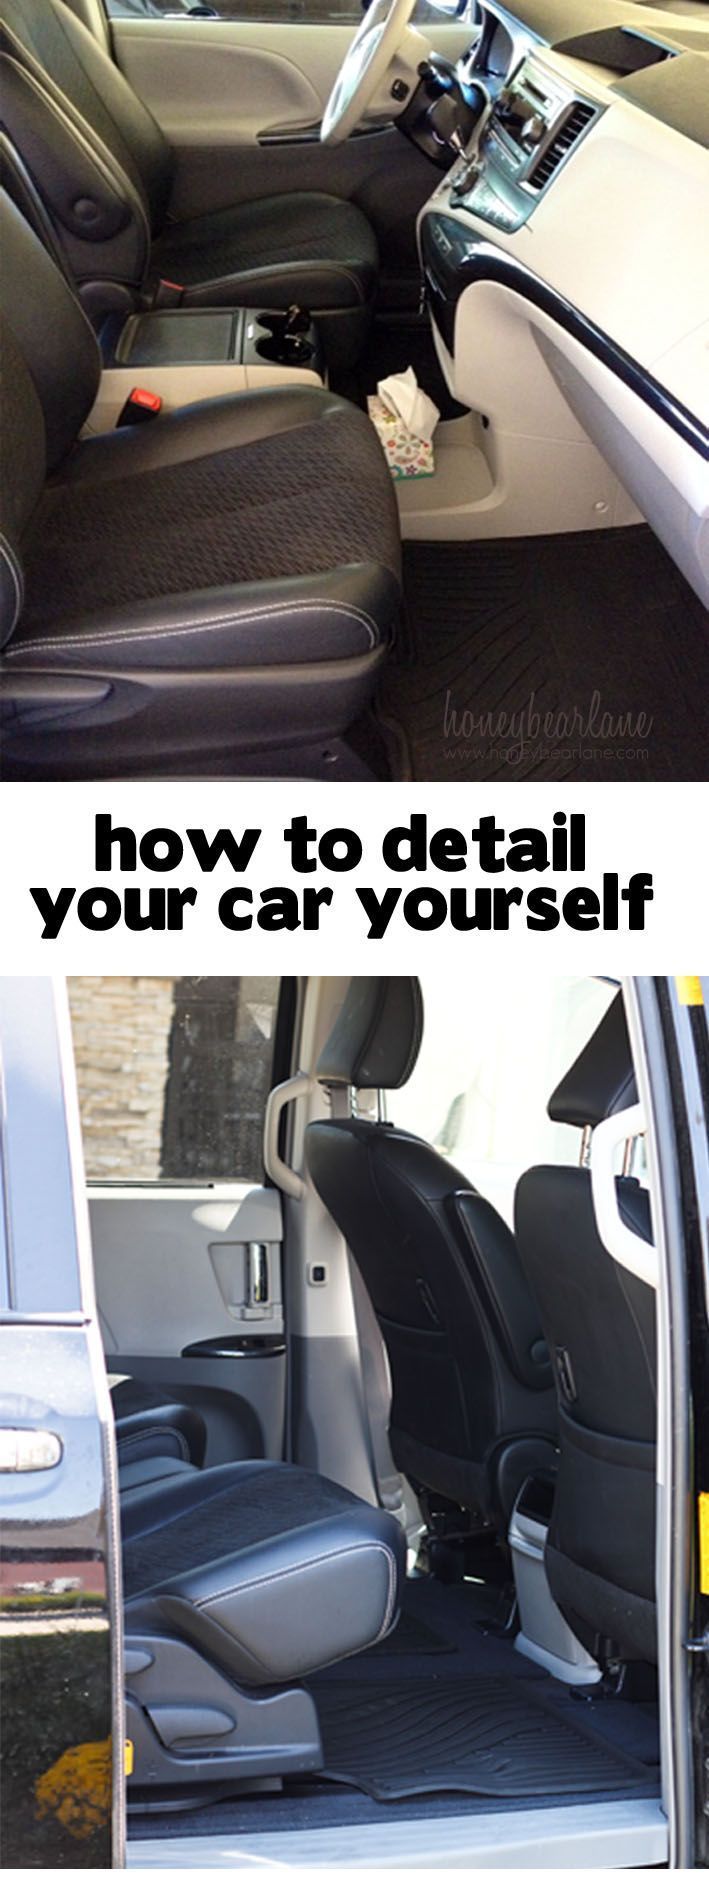 How to detail your car yourself like the pros!